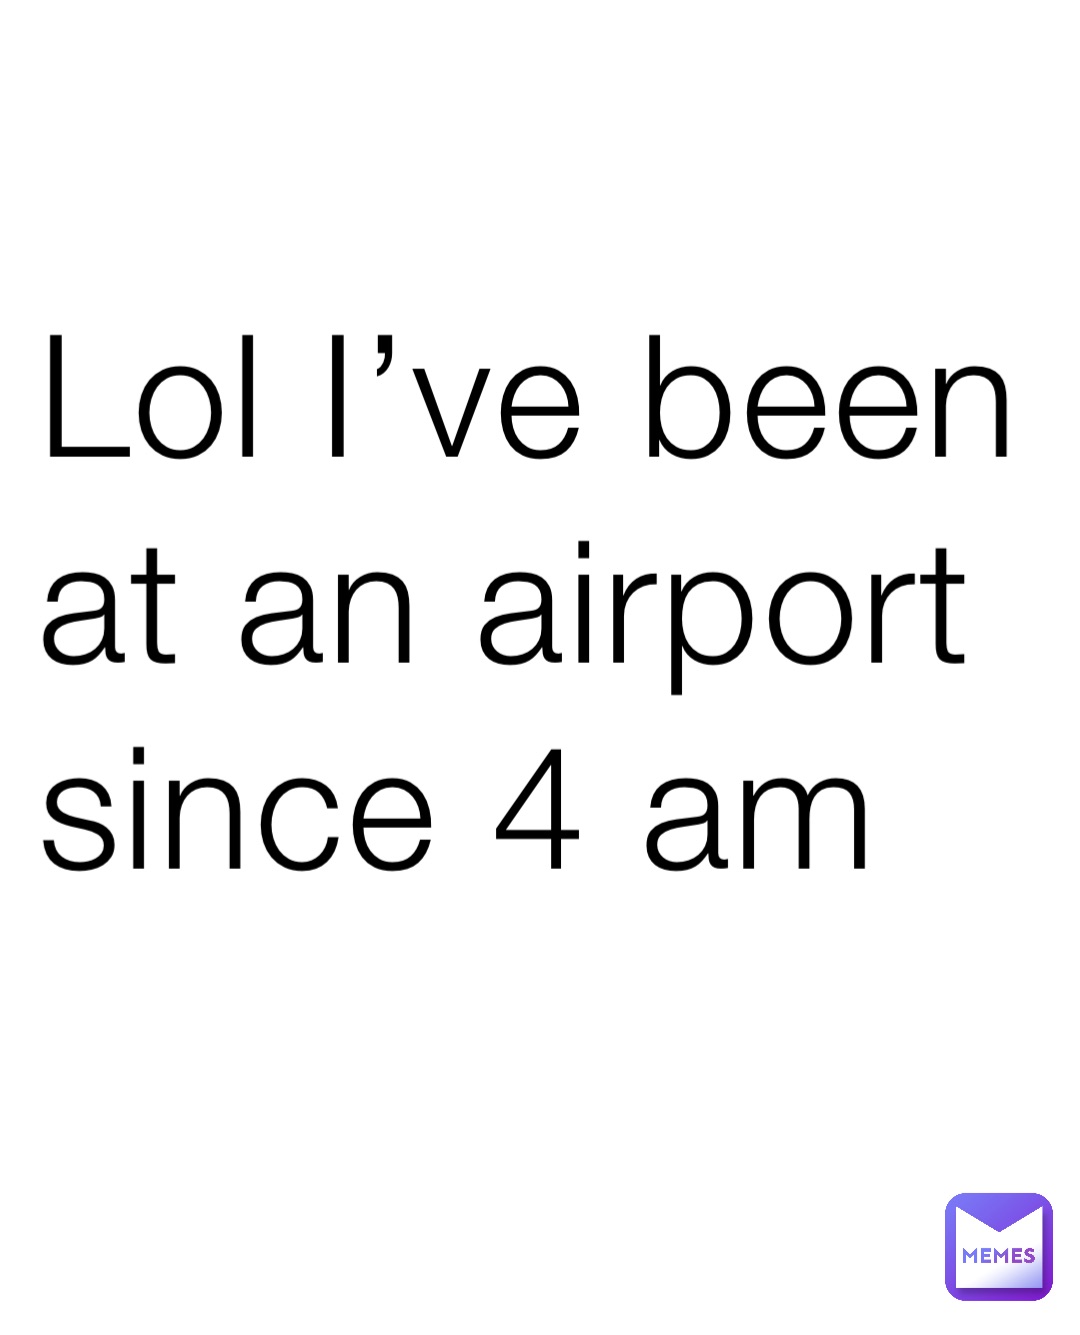 Lol I’ve been at an airport since 4 am